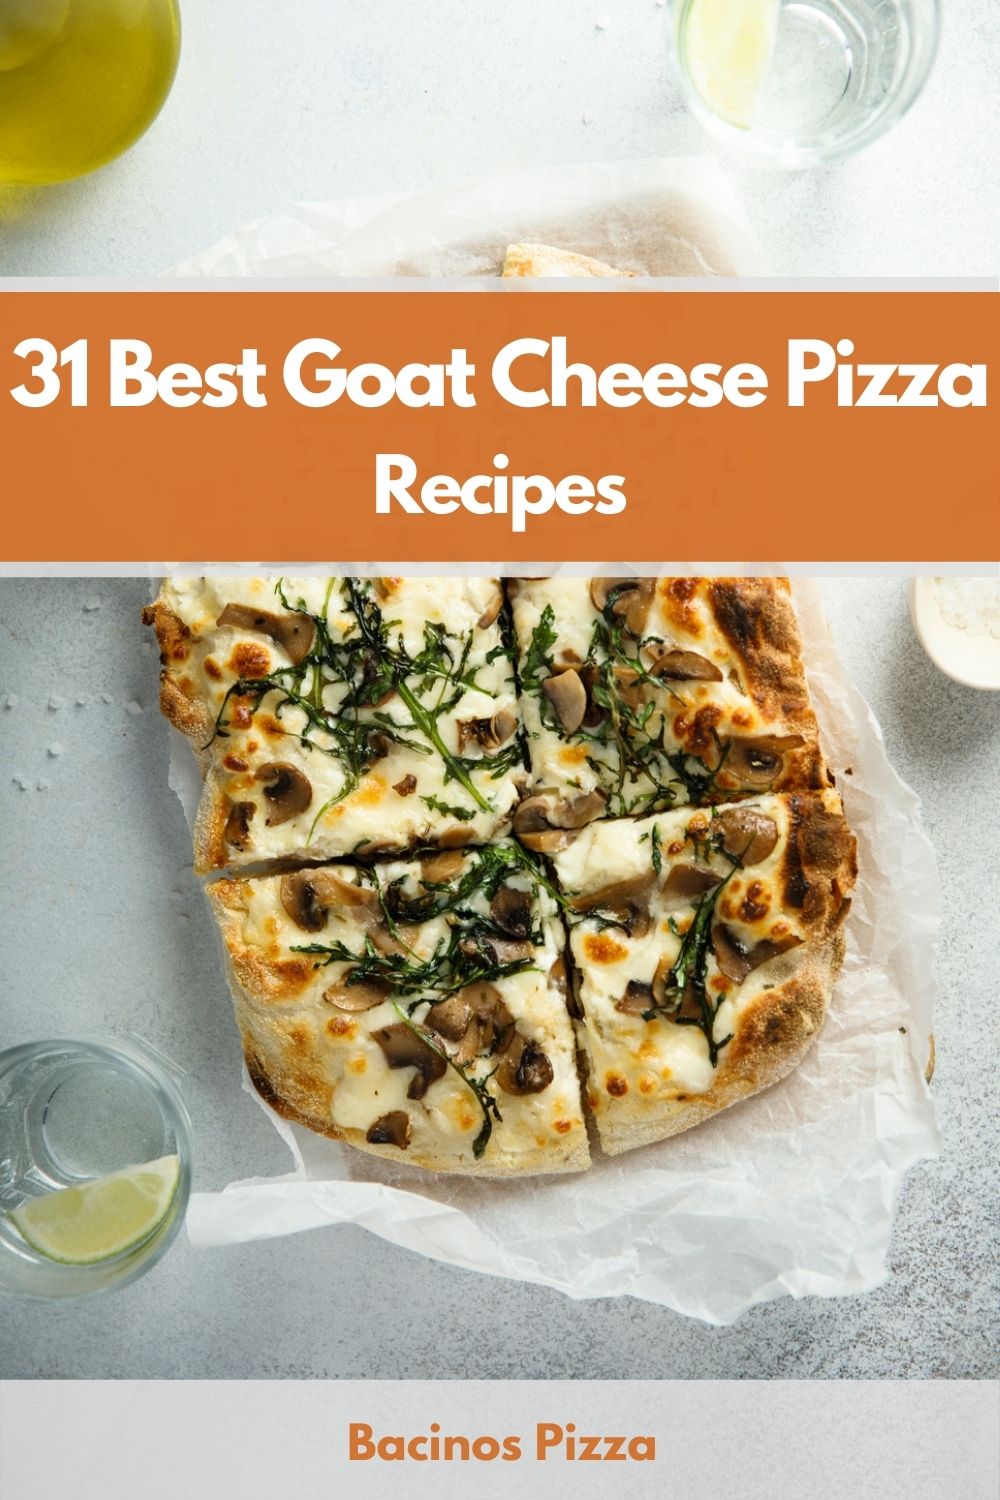 31 Best Goat Cheese Pizza Recipes pin